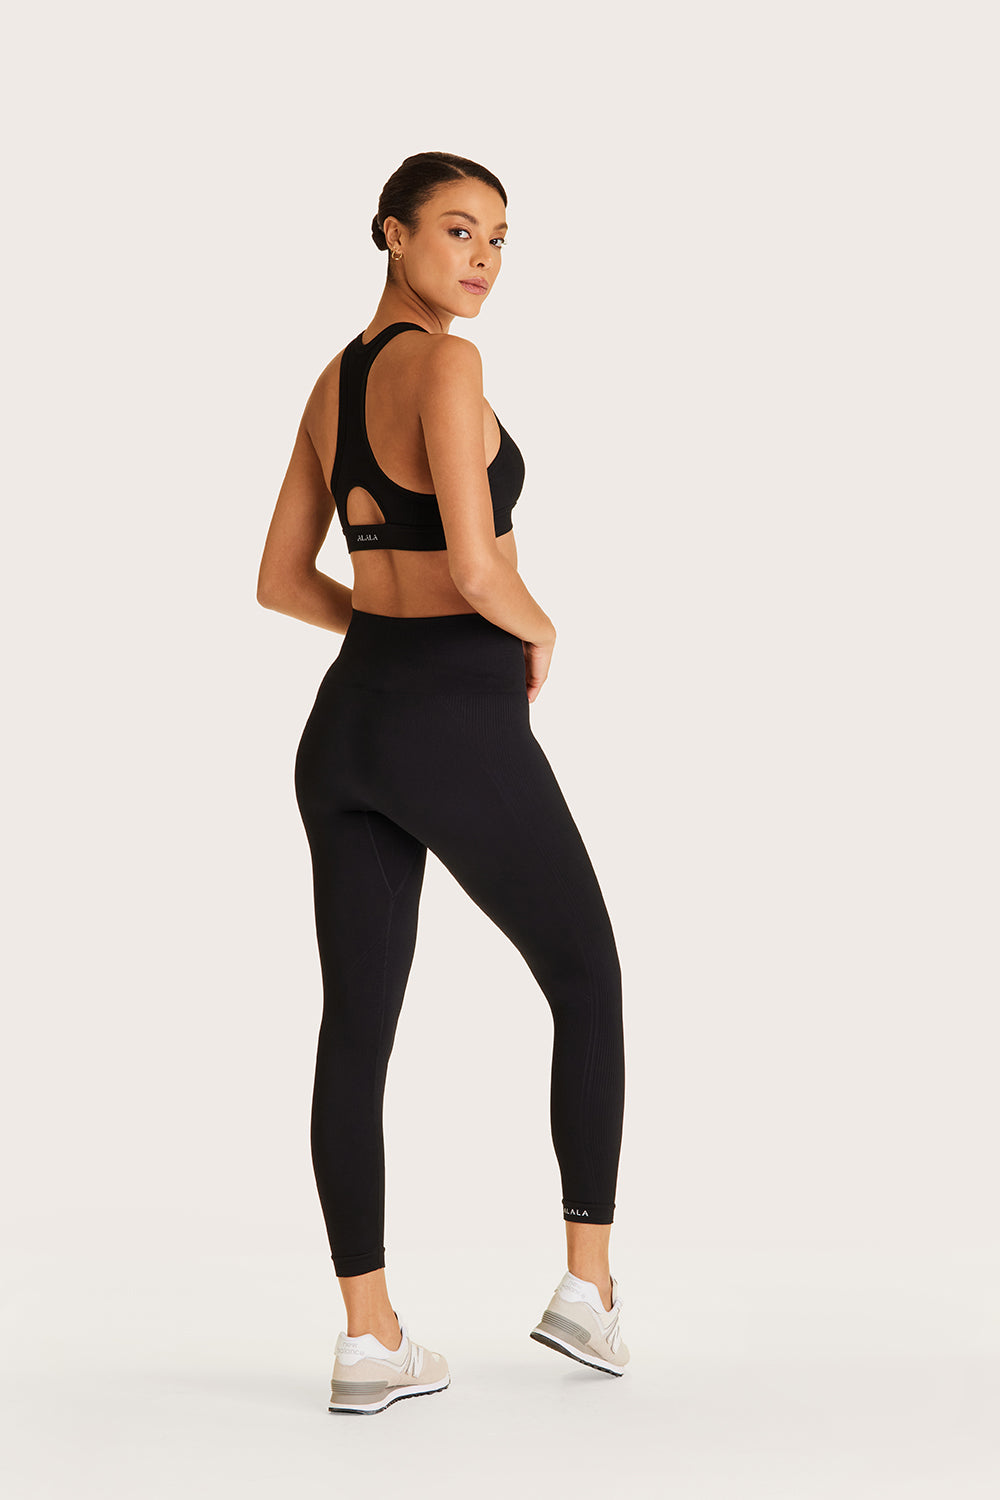 7/8 Barre Seamless Tight in Black | AlalaStyle